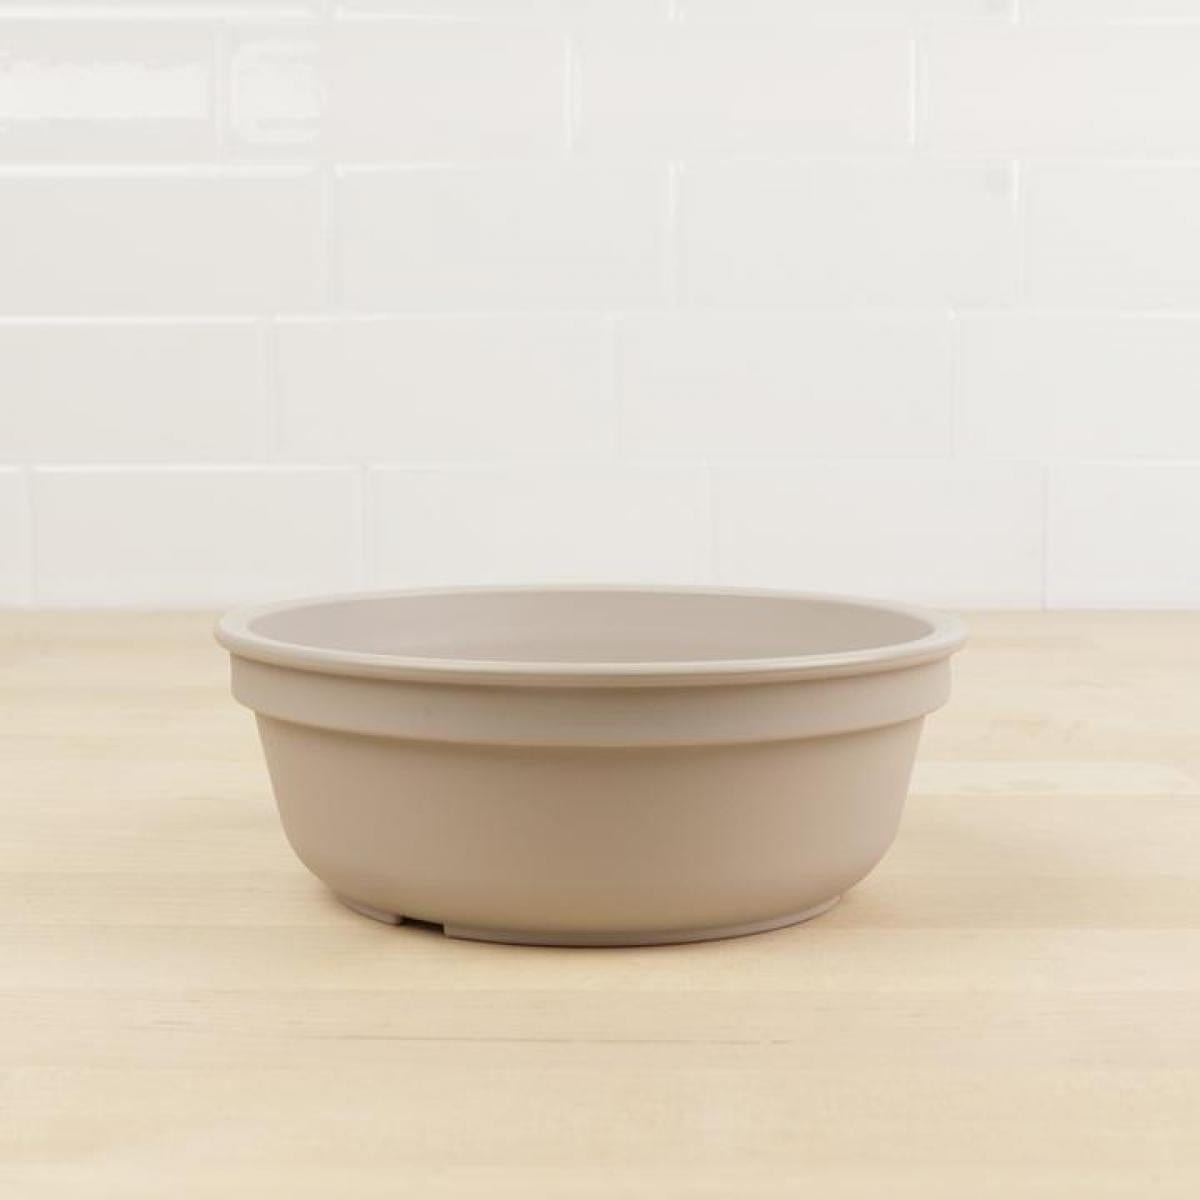 Re-Play utensils Sand - Re-Play Bowl - Small Re-Play Bowl - Small